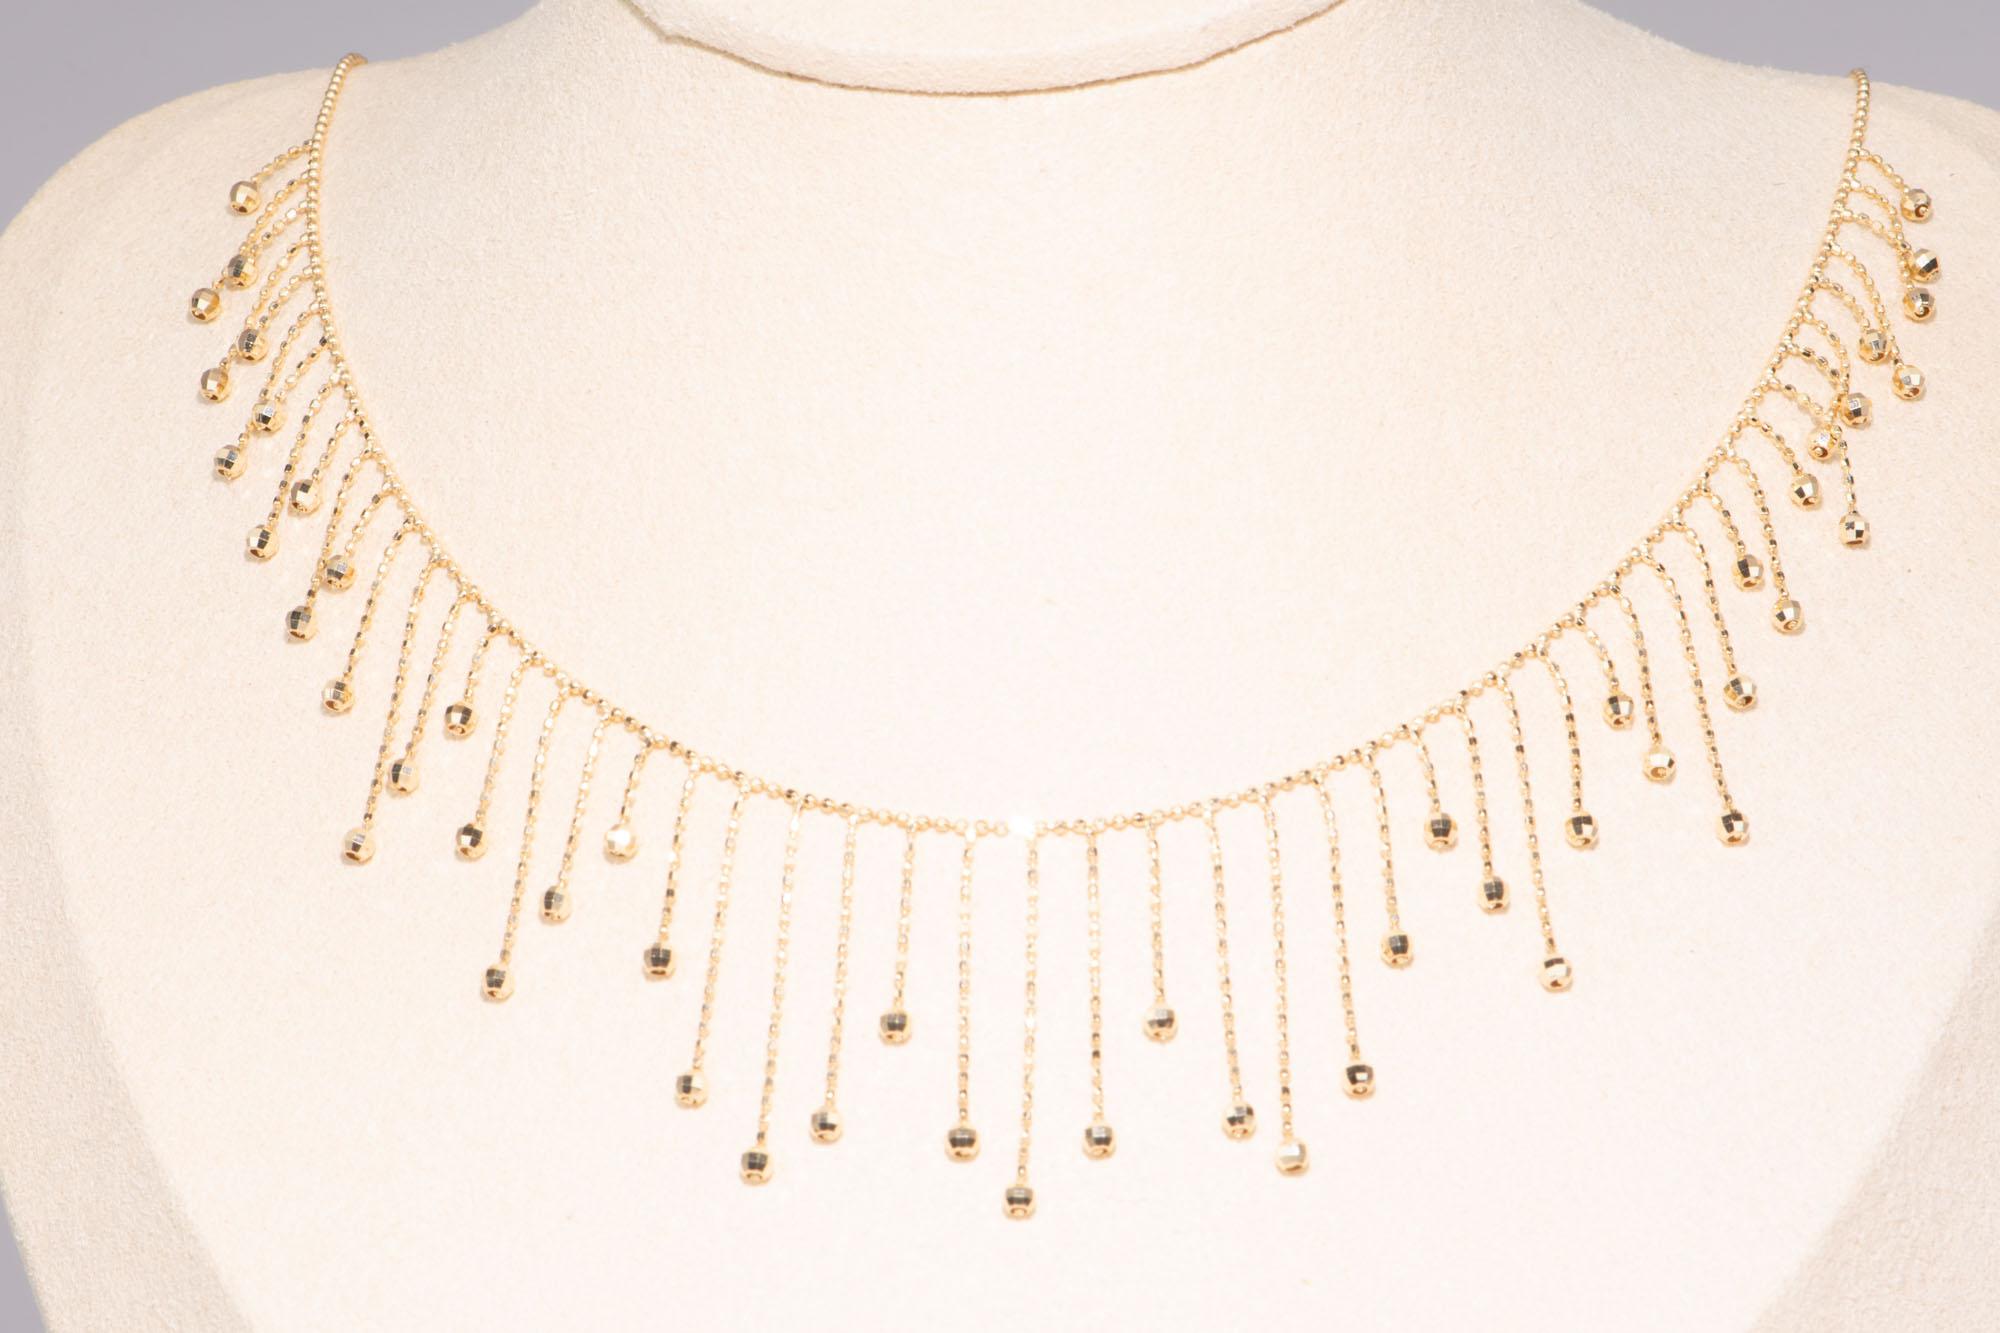 ♥ 18K Gold Beaded Lace Fringe Necklace 5.88g
♥ The necklace measures 17.5